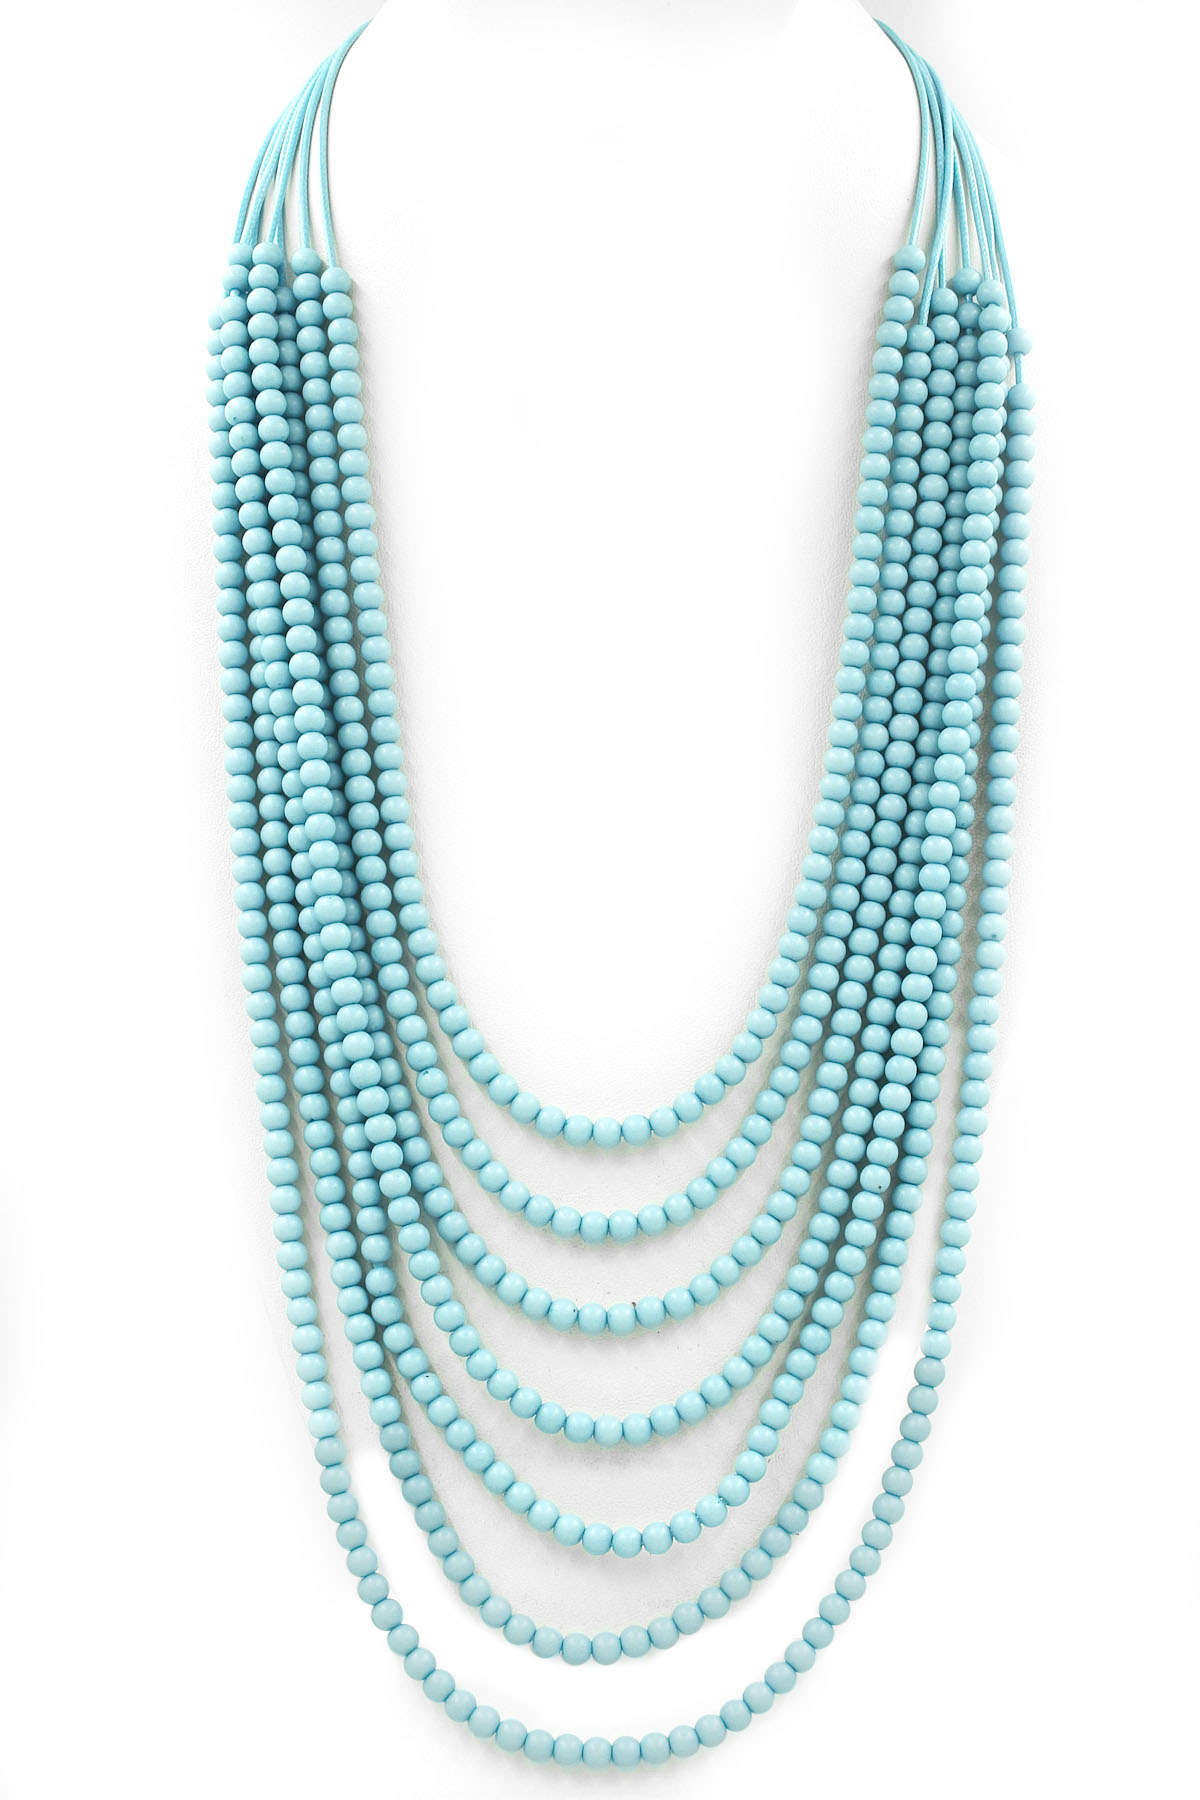 Layered Acrylic Bead Wax Cord Necklace Necklaces